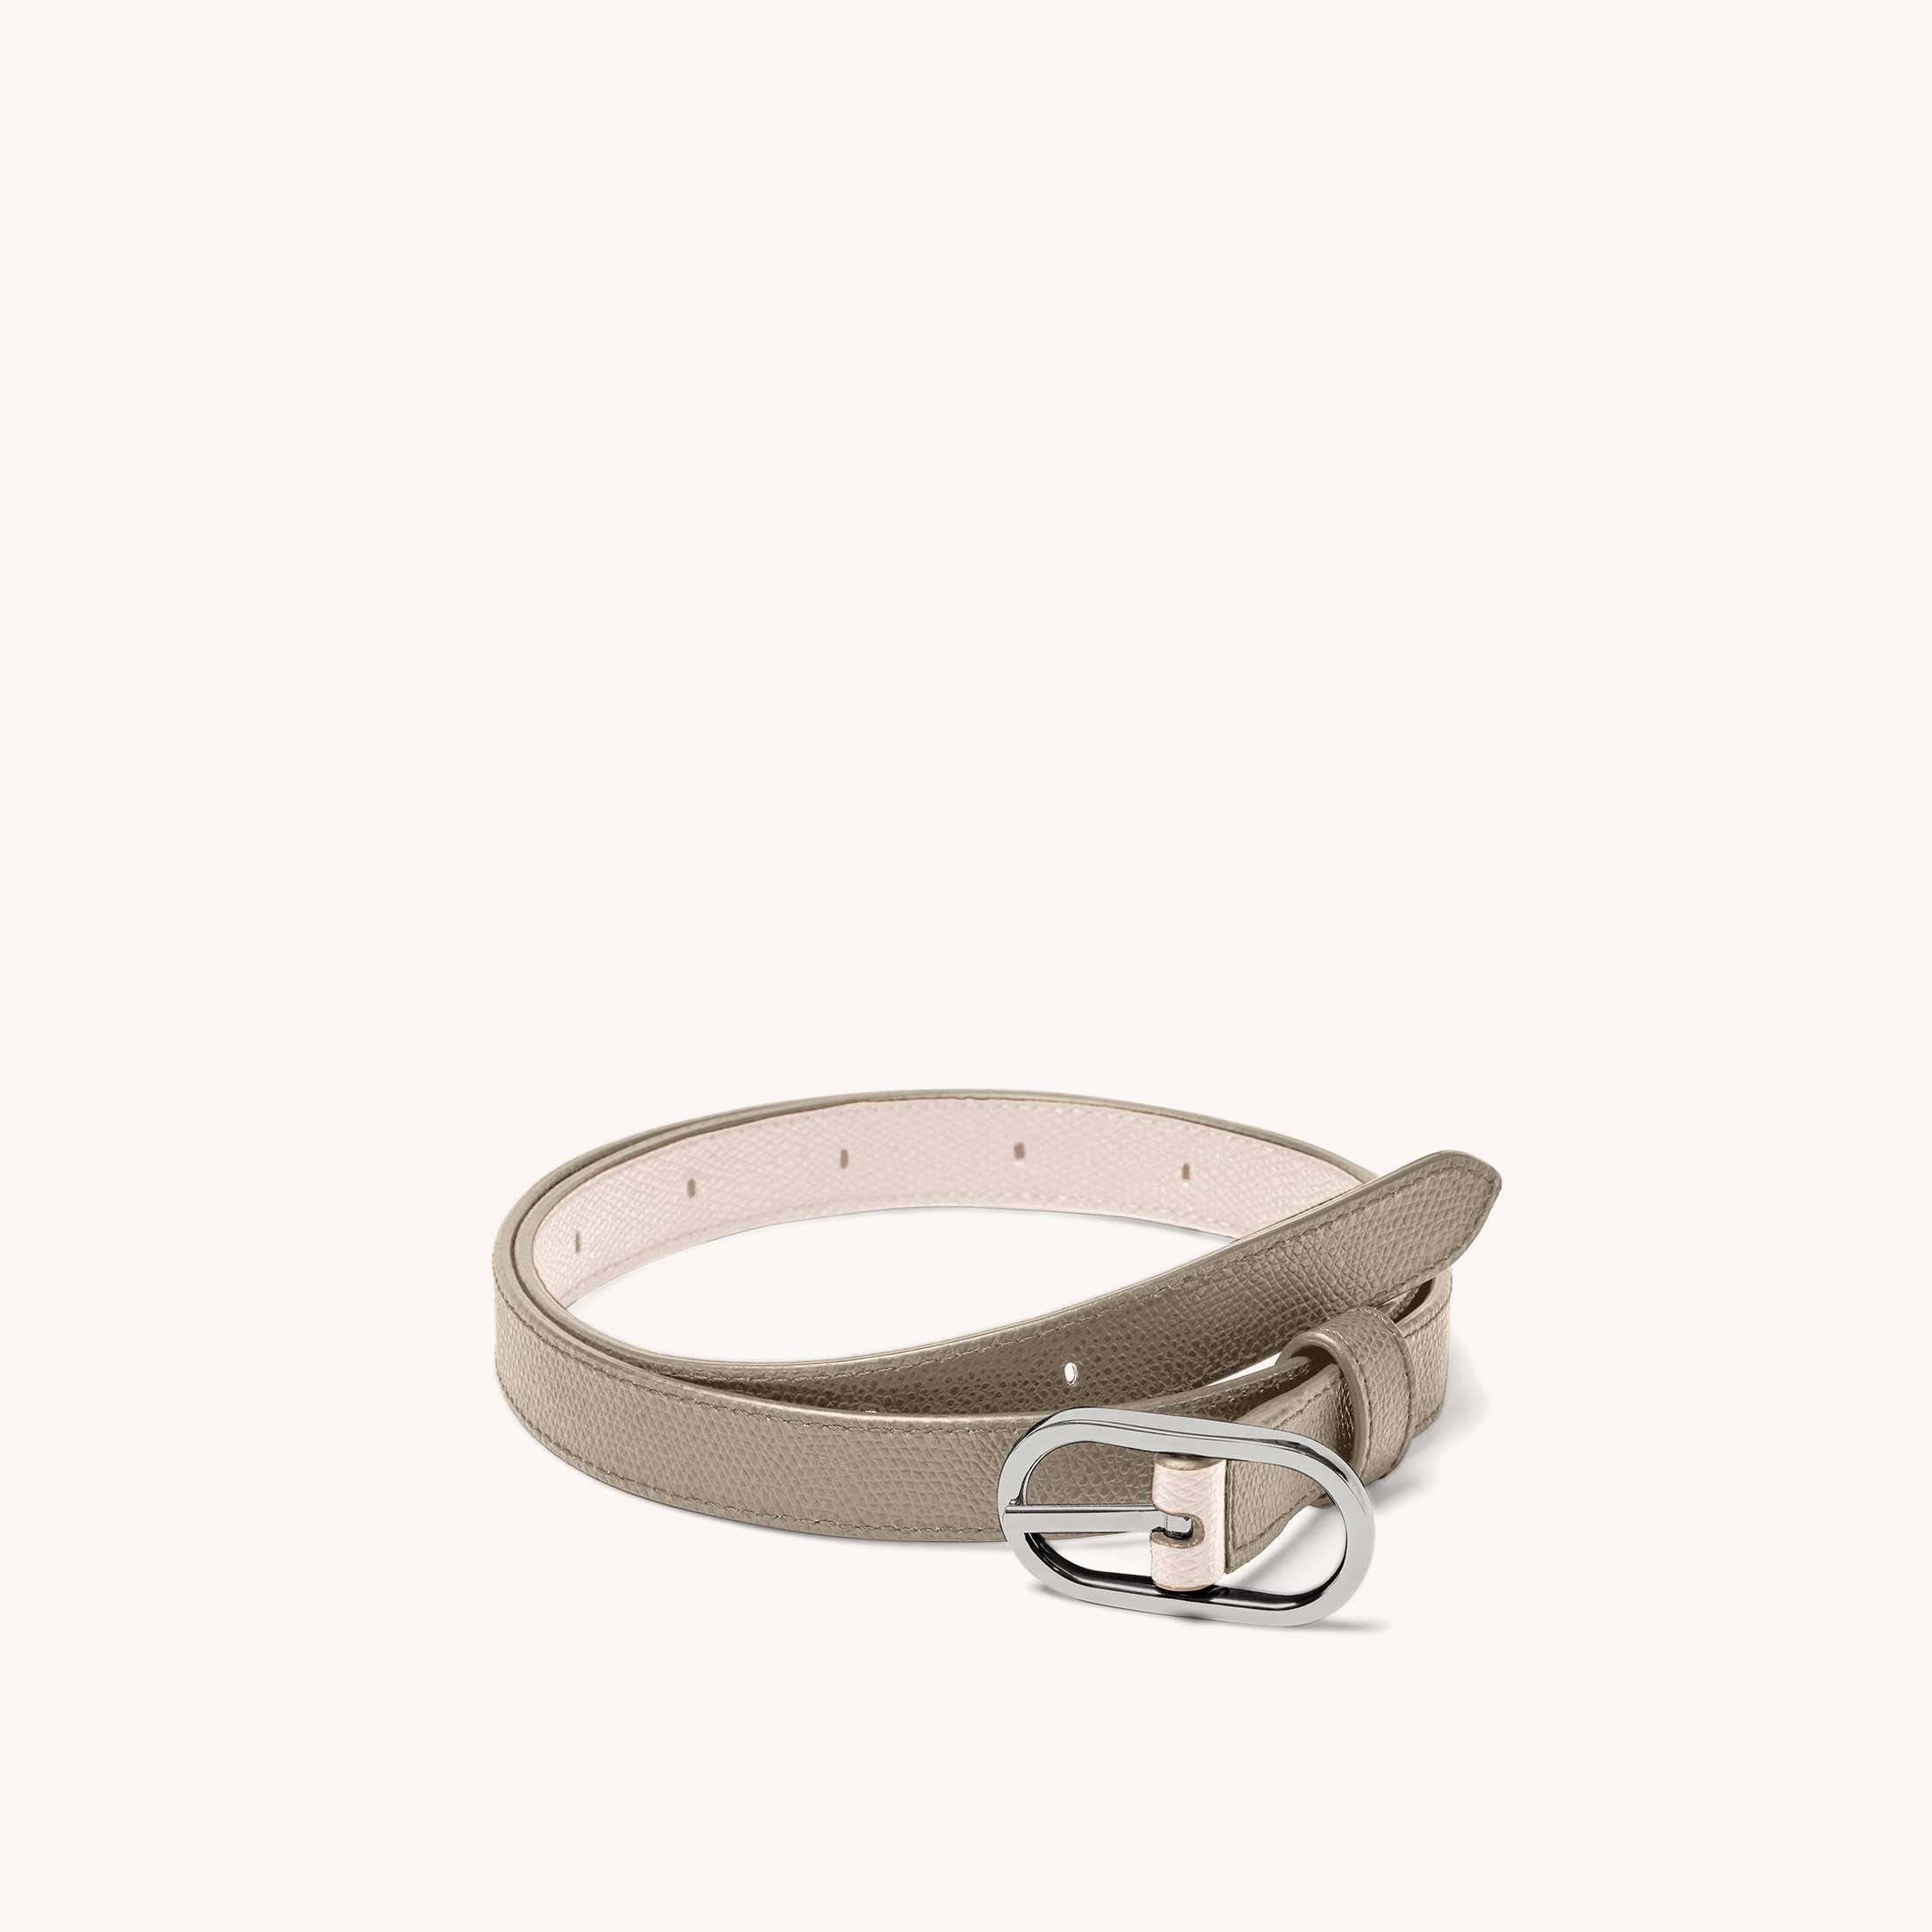 Reversible Shoulder Strap Colorblock Sand/Blush with Silver Hardware in Two Loops